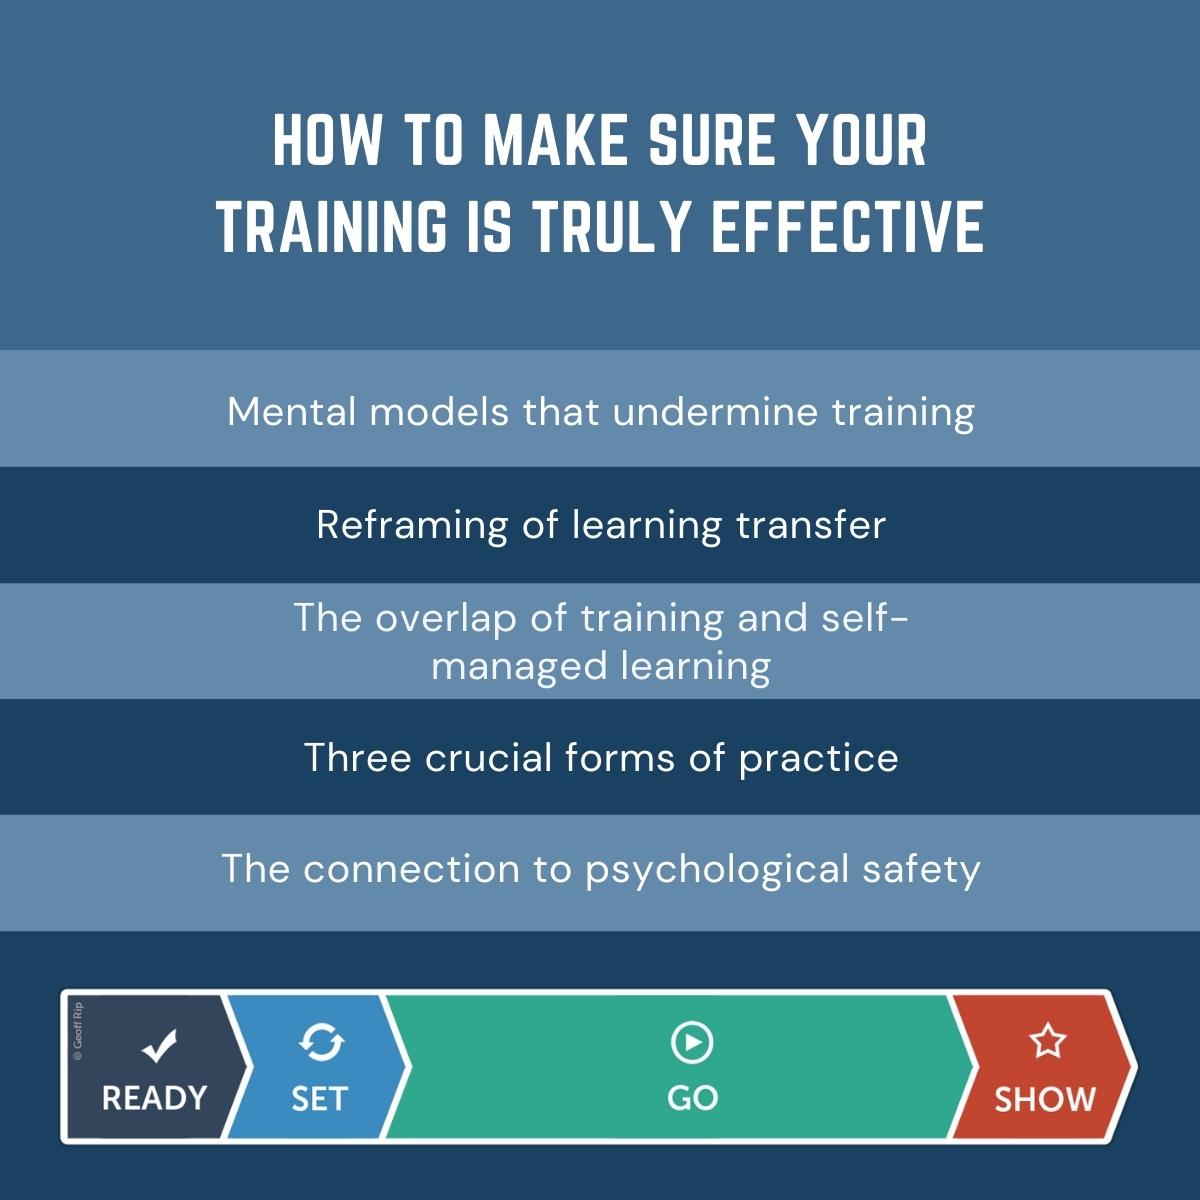 How to Make Sure Your Training is Truly Effective